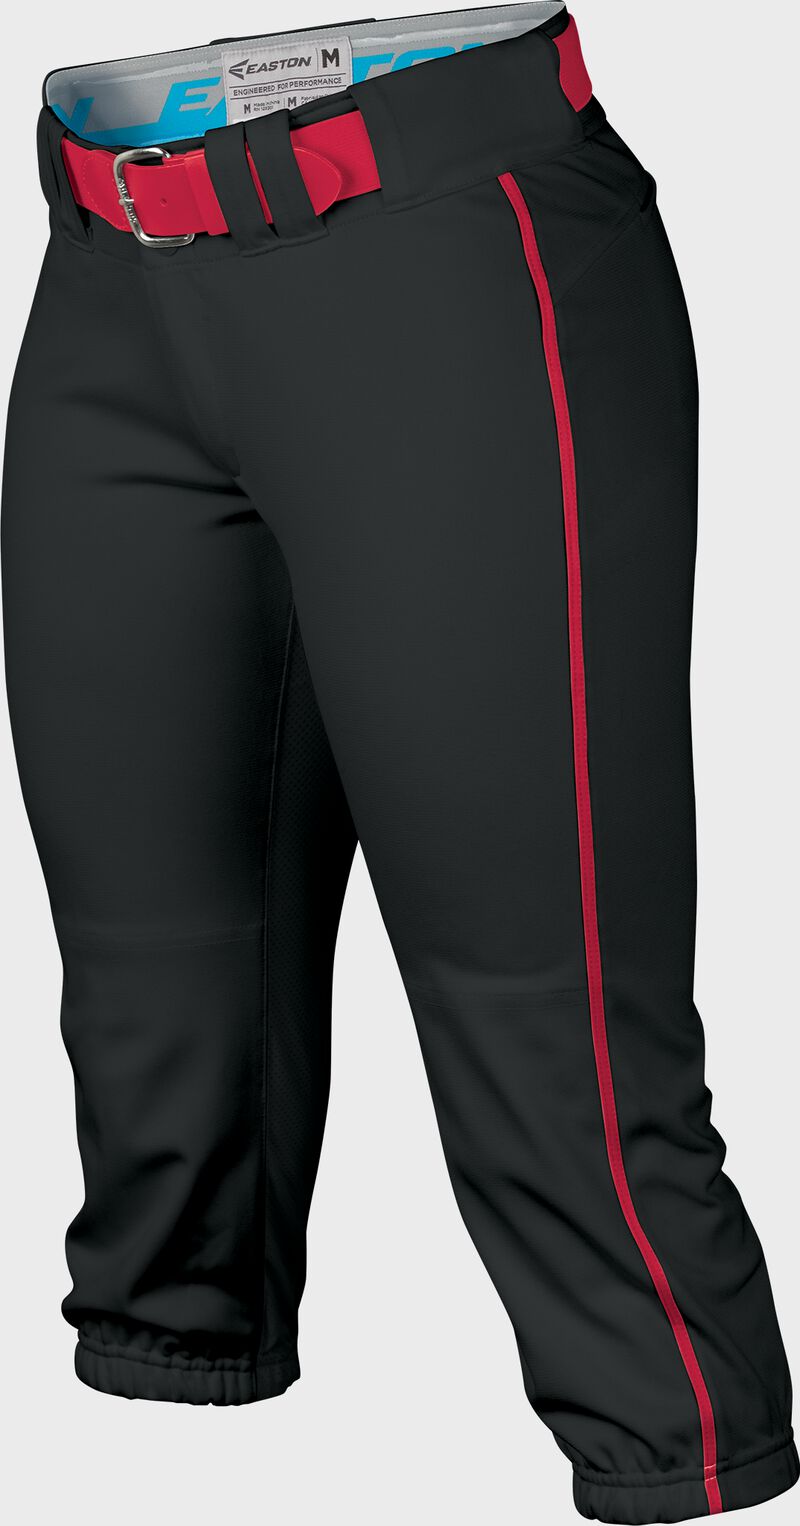 Easton Prowess Softball Pant Women's Piped BLACK/RED  XXL